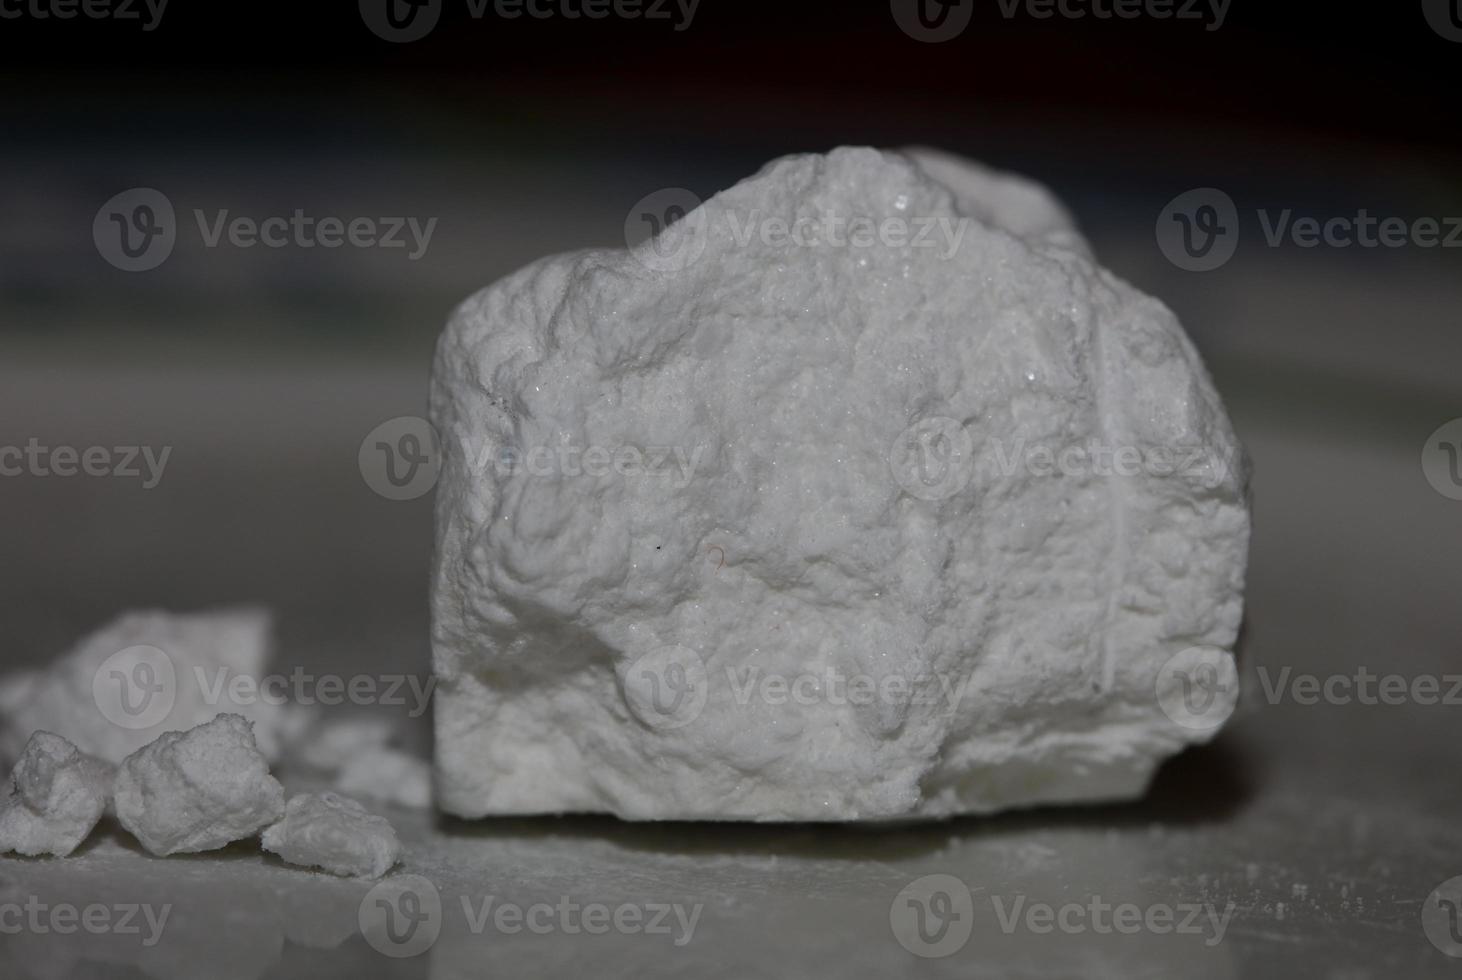 Pure cocaine rocks close up dope and drugs background high quality big size instant print illegal substances stock photography photo